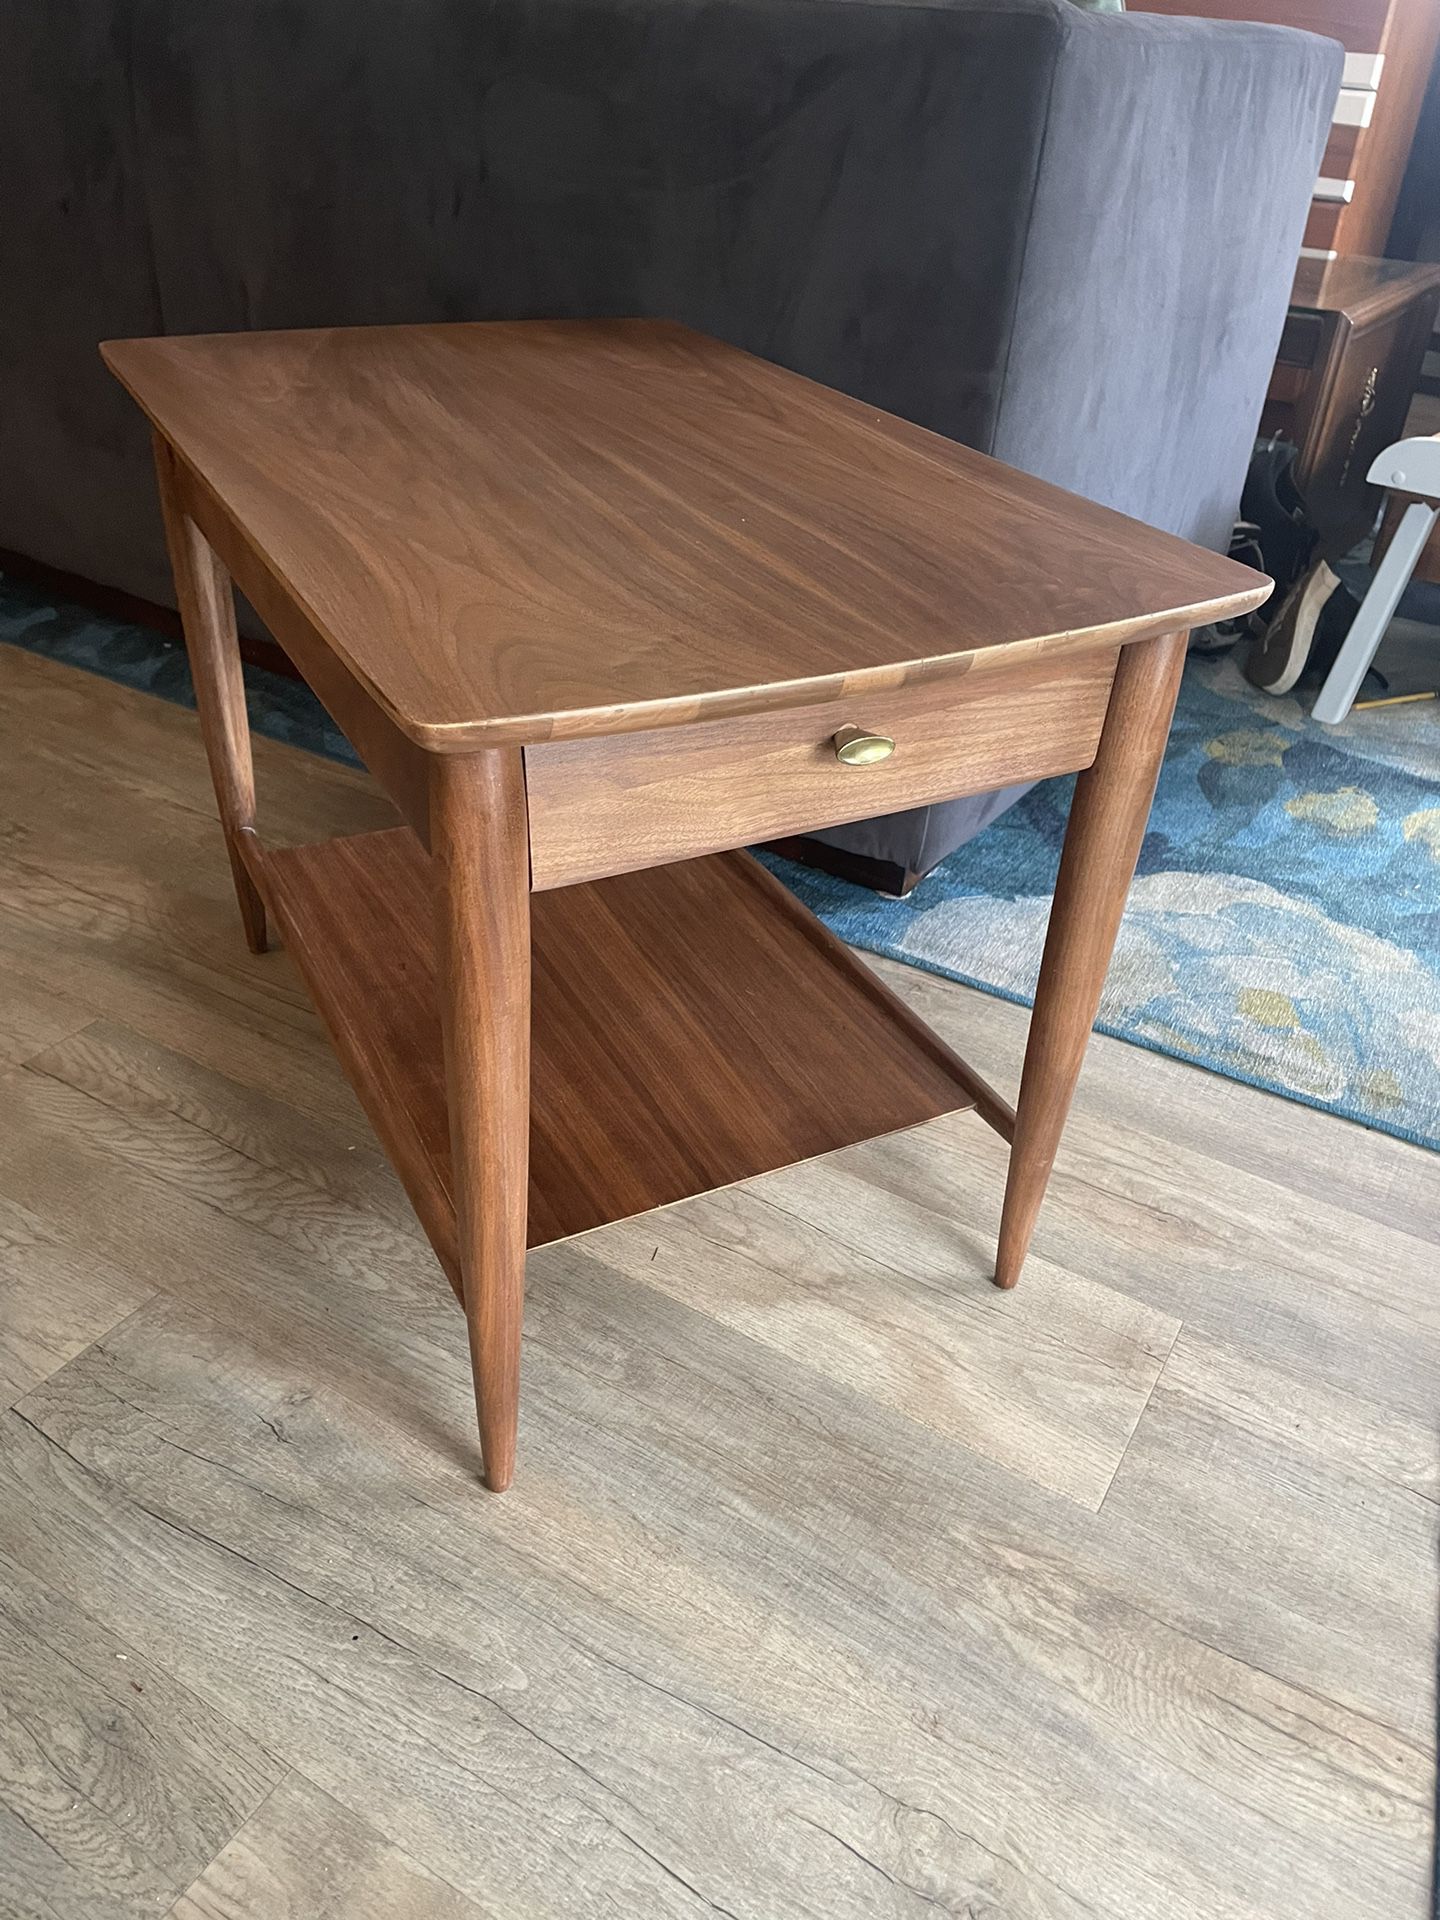 SPARKLING Mersman mid century end table - one drawer - one shelf - delivery available